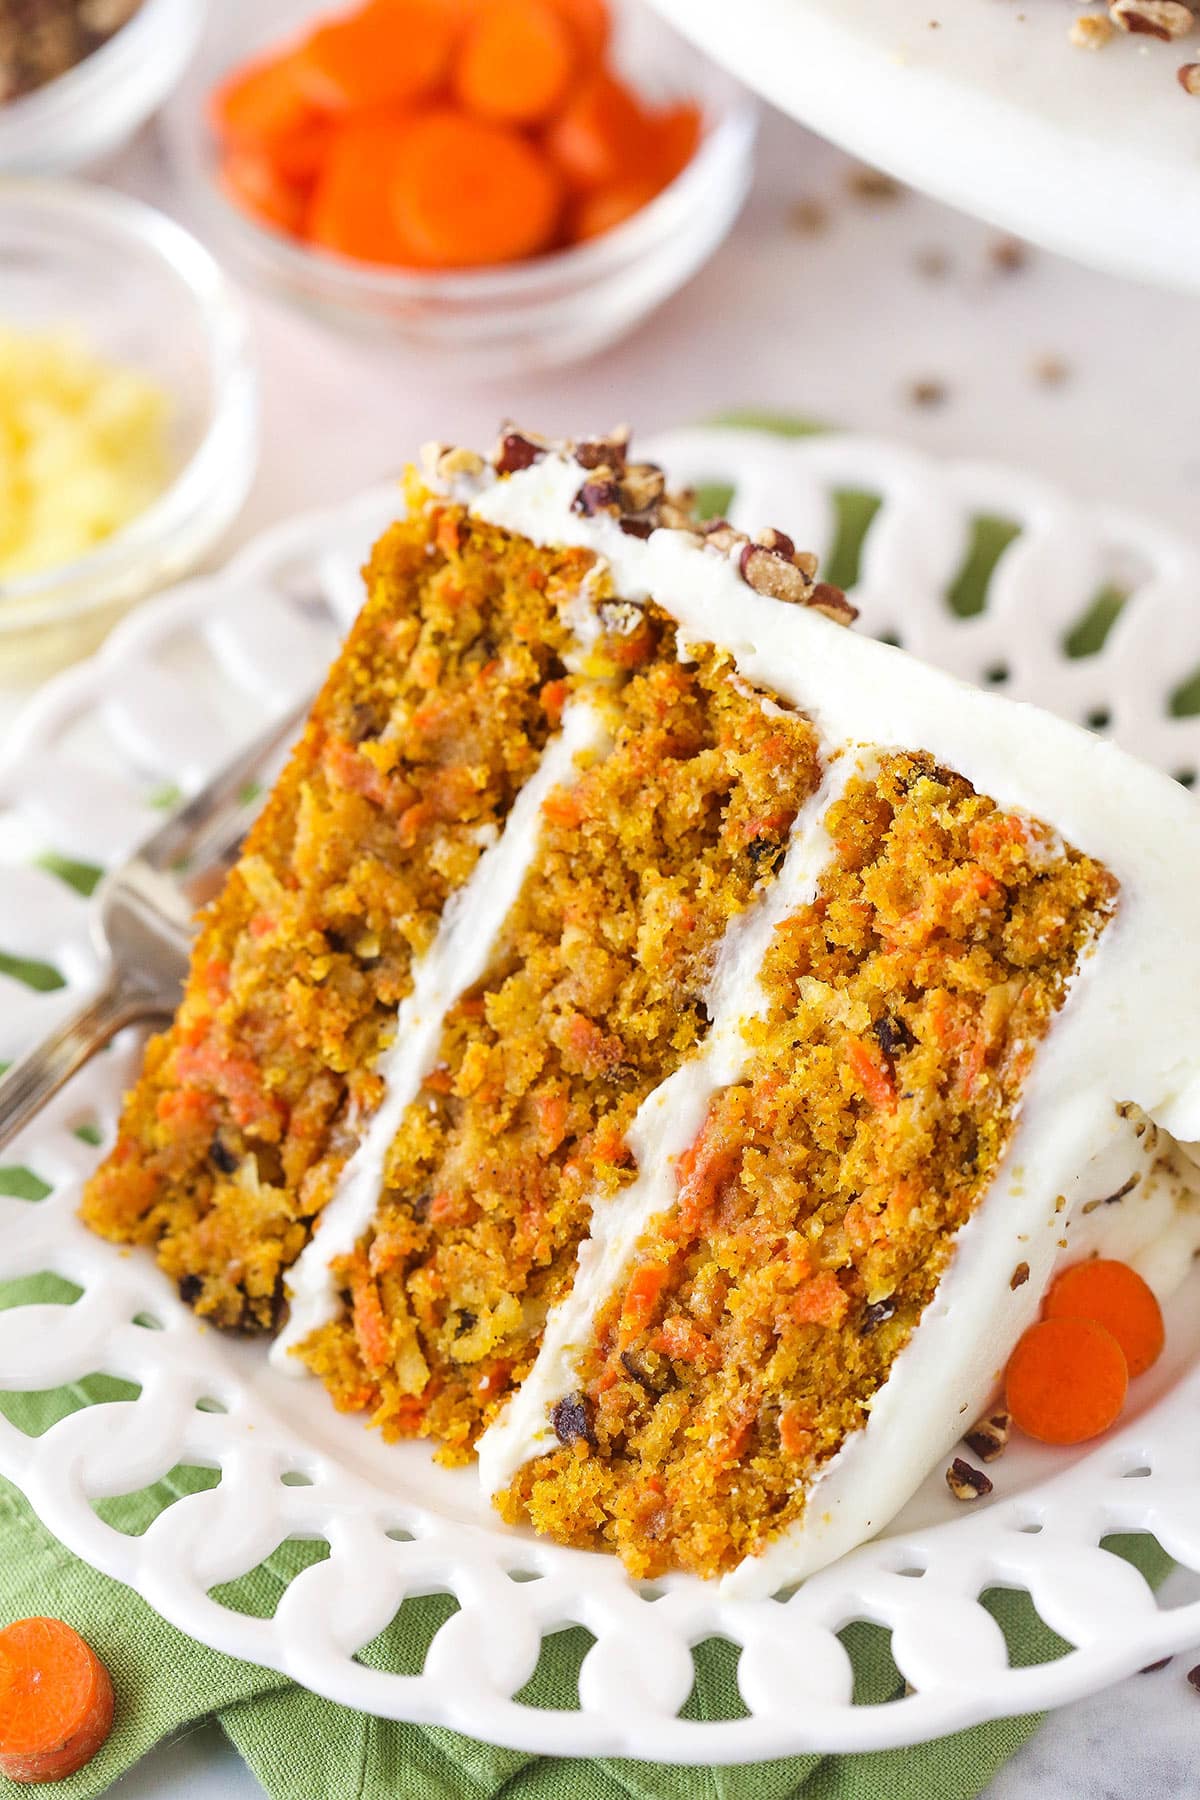 The BEST Carrot Cake Recipe - Super Moist & Loaded With Tasty Mix-Ins